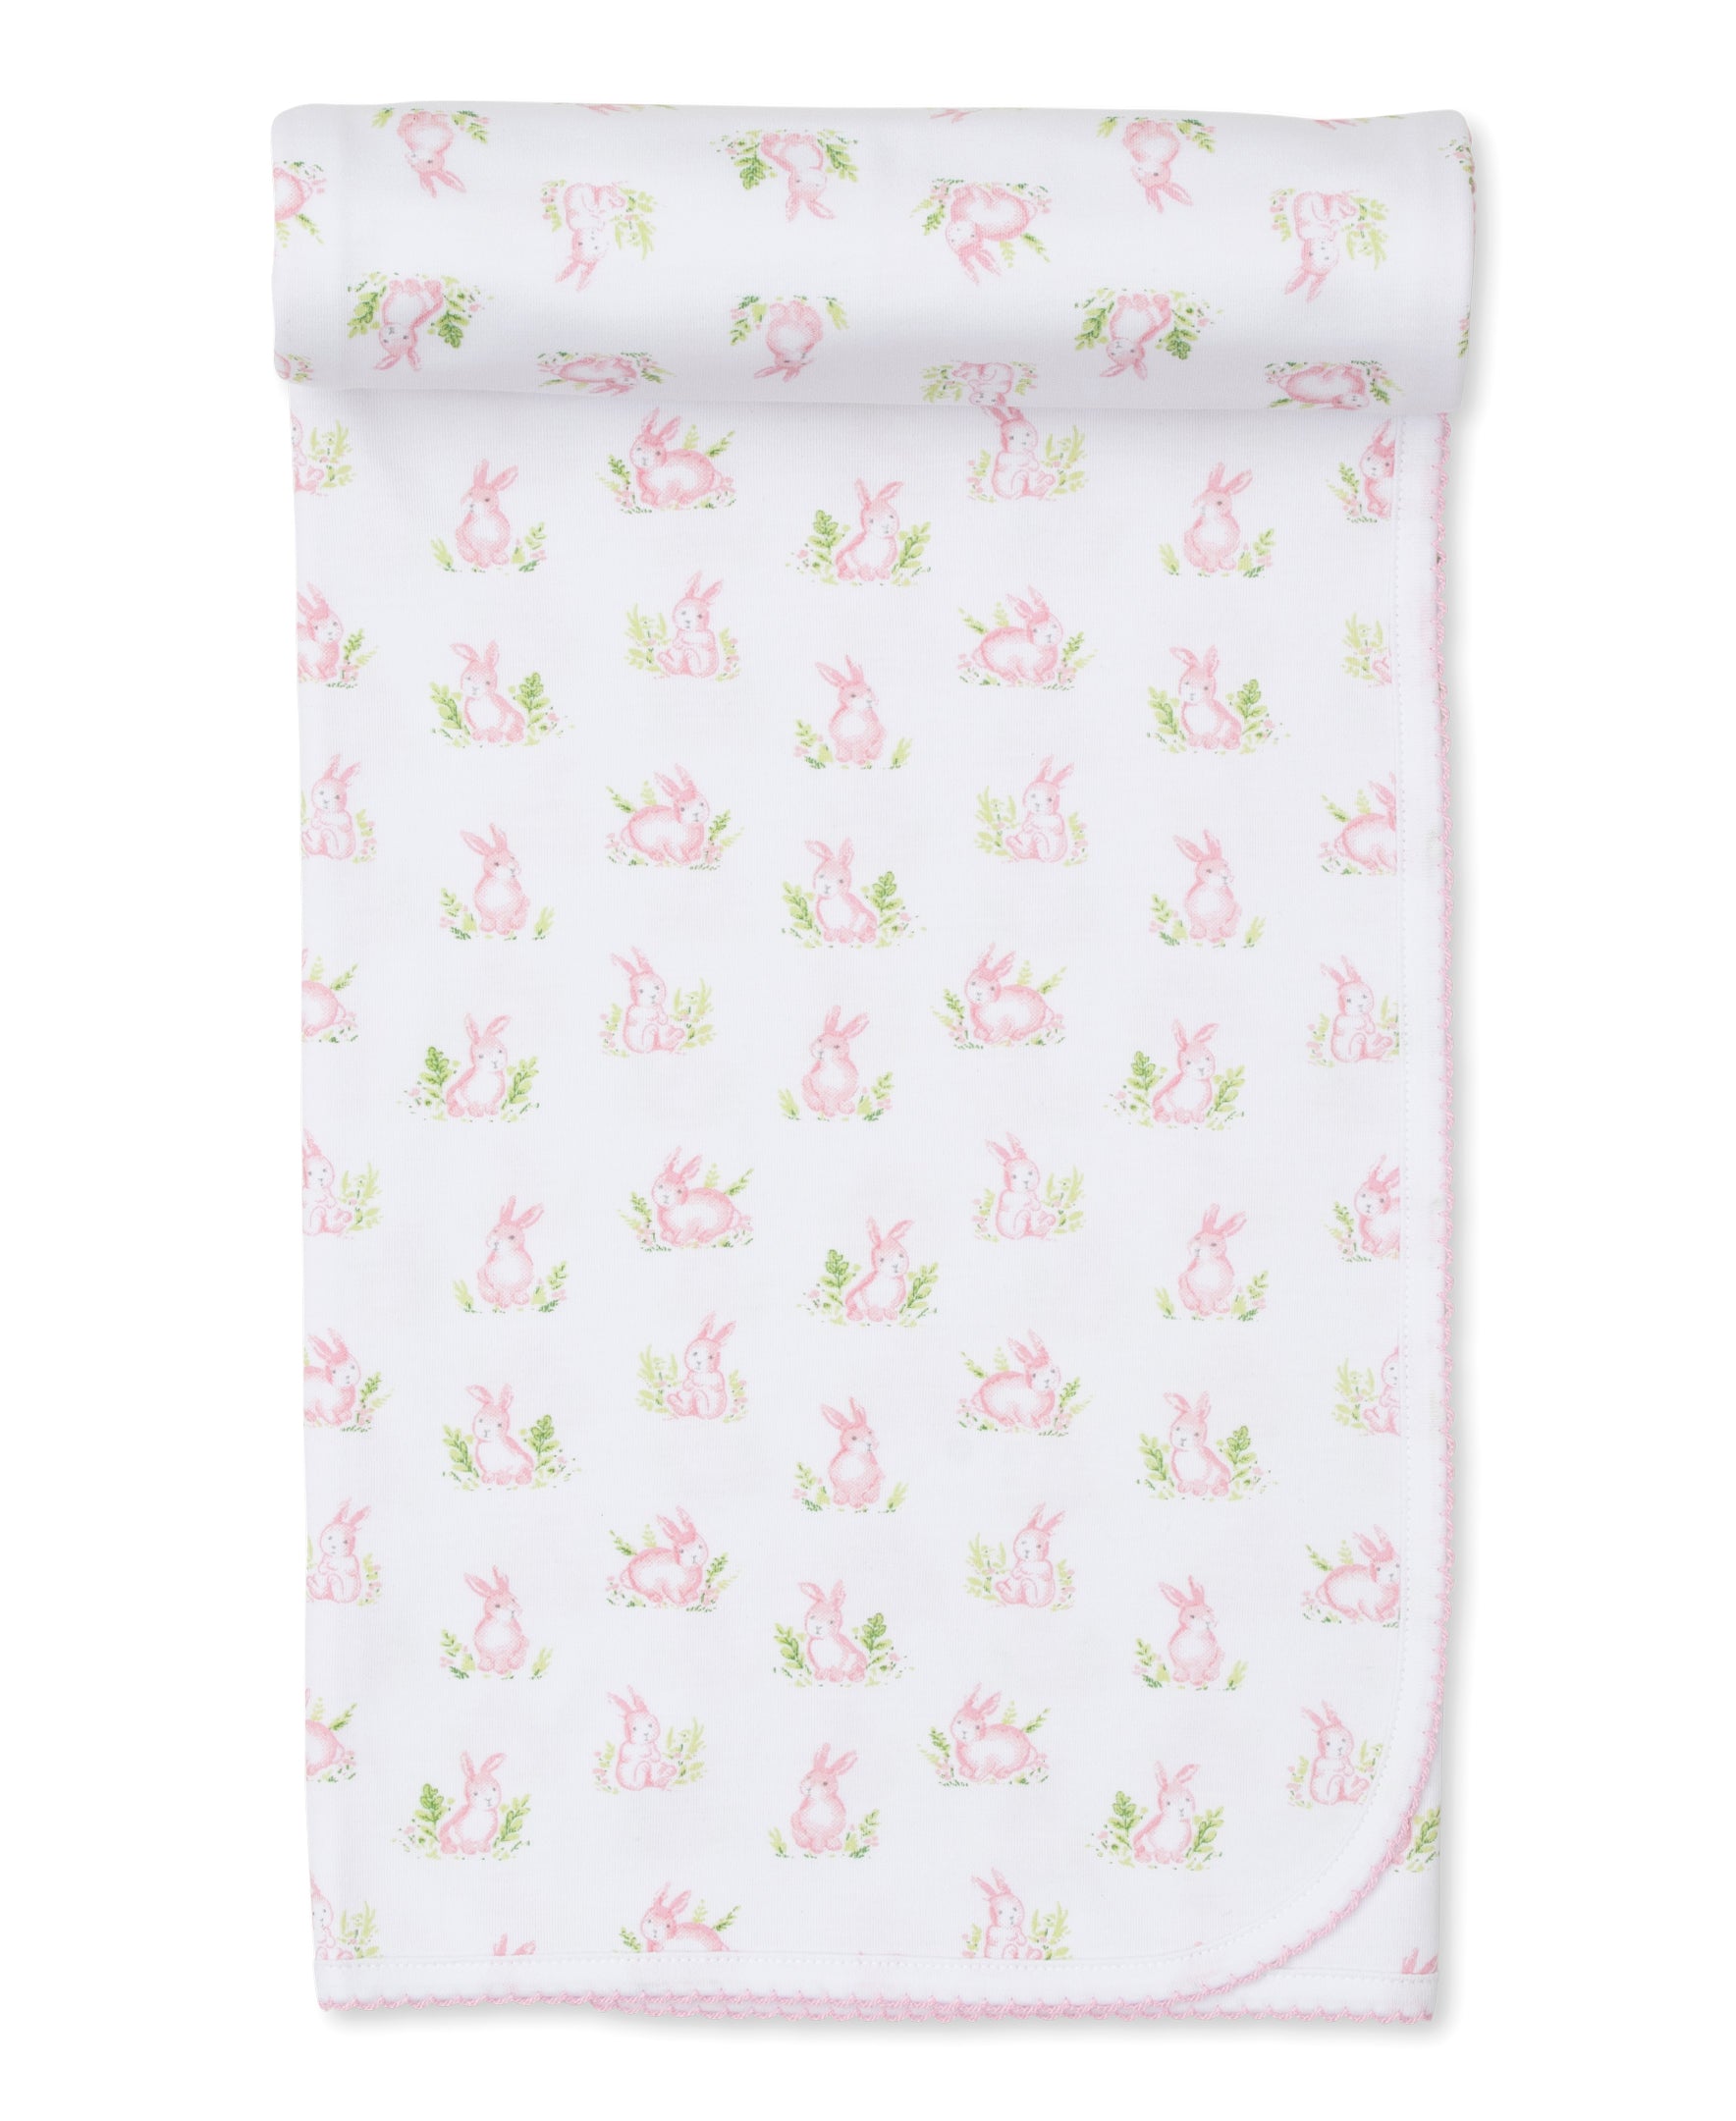 Cottontail Hollows Pink Blanket - Kissy Kissy